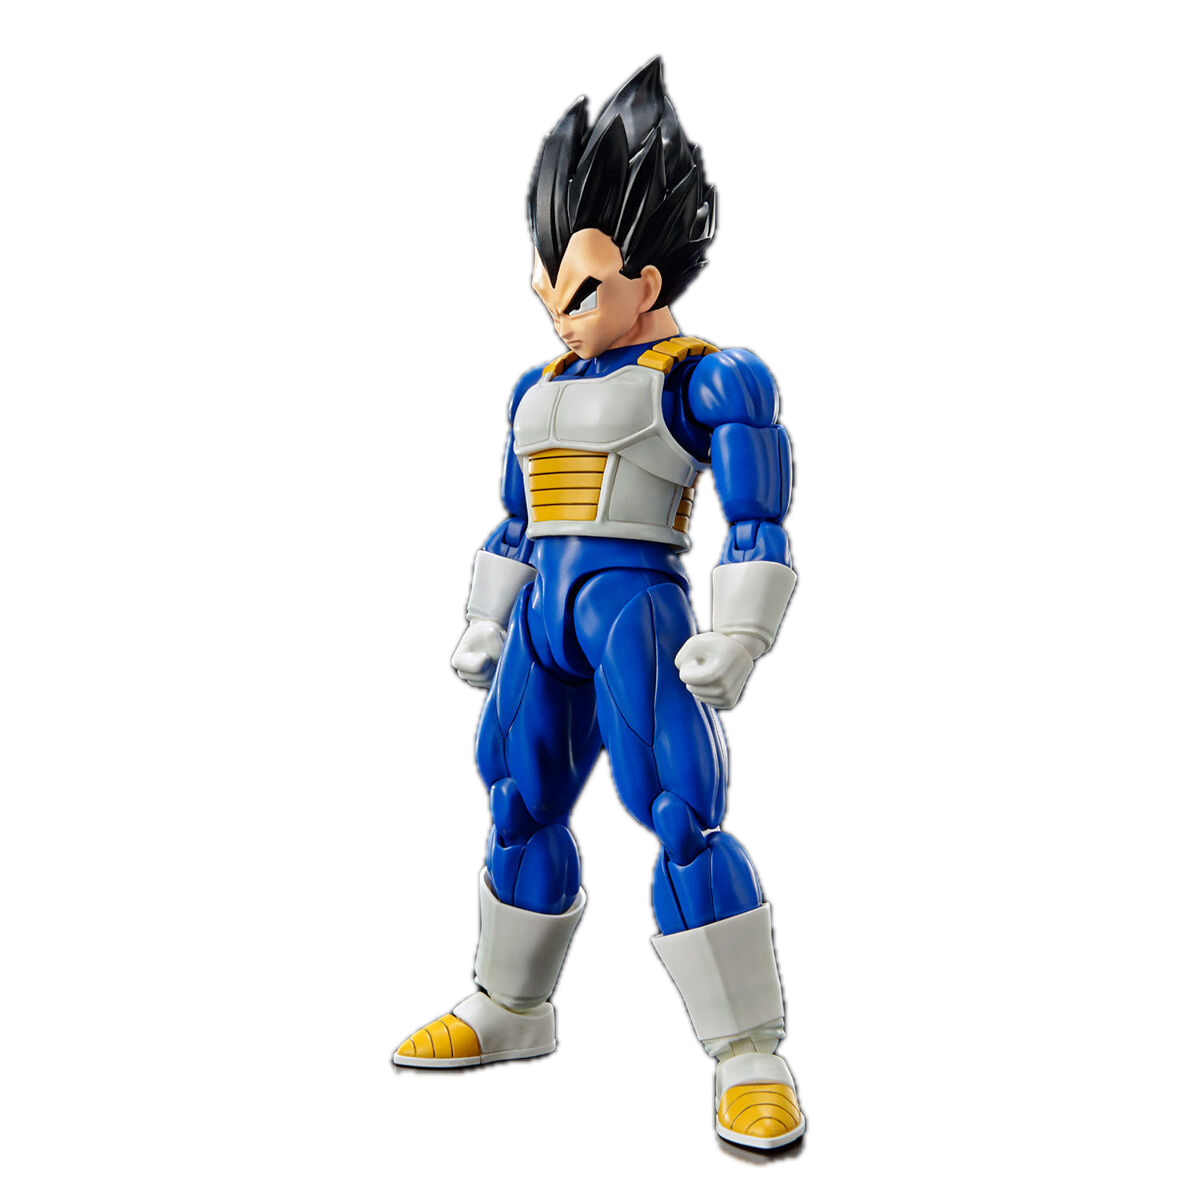 Dragon Ball - Vegeta (NEW SPEC Ver.) - Figure-rise Standard Model Kit, Upgraded Muscle Build System PLUS, Improved range of motion and joint structure, Colorful finish through molded colors, Includes various accessories and display base, Franchise: Dragon Ball, Brand: Bandai, Release Date: 2023-07-29, Type: Model Kit, Store Name: Nippon Figures